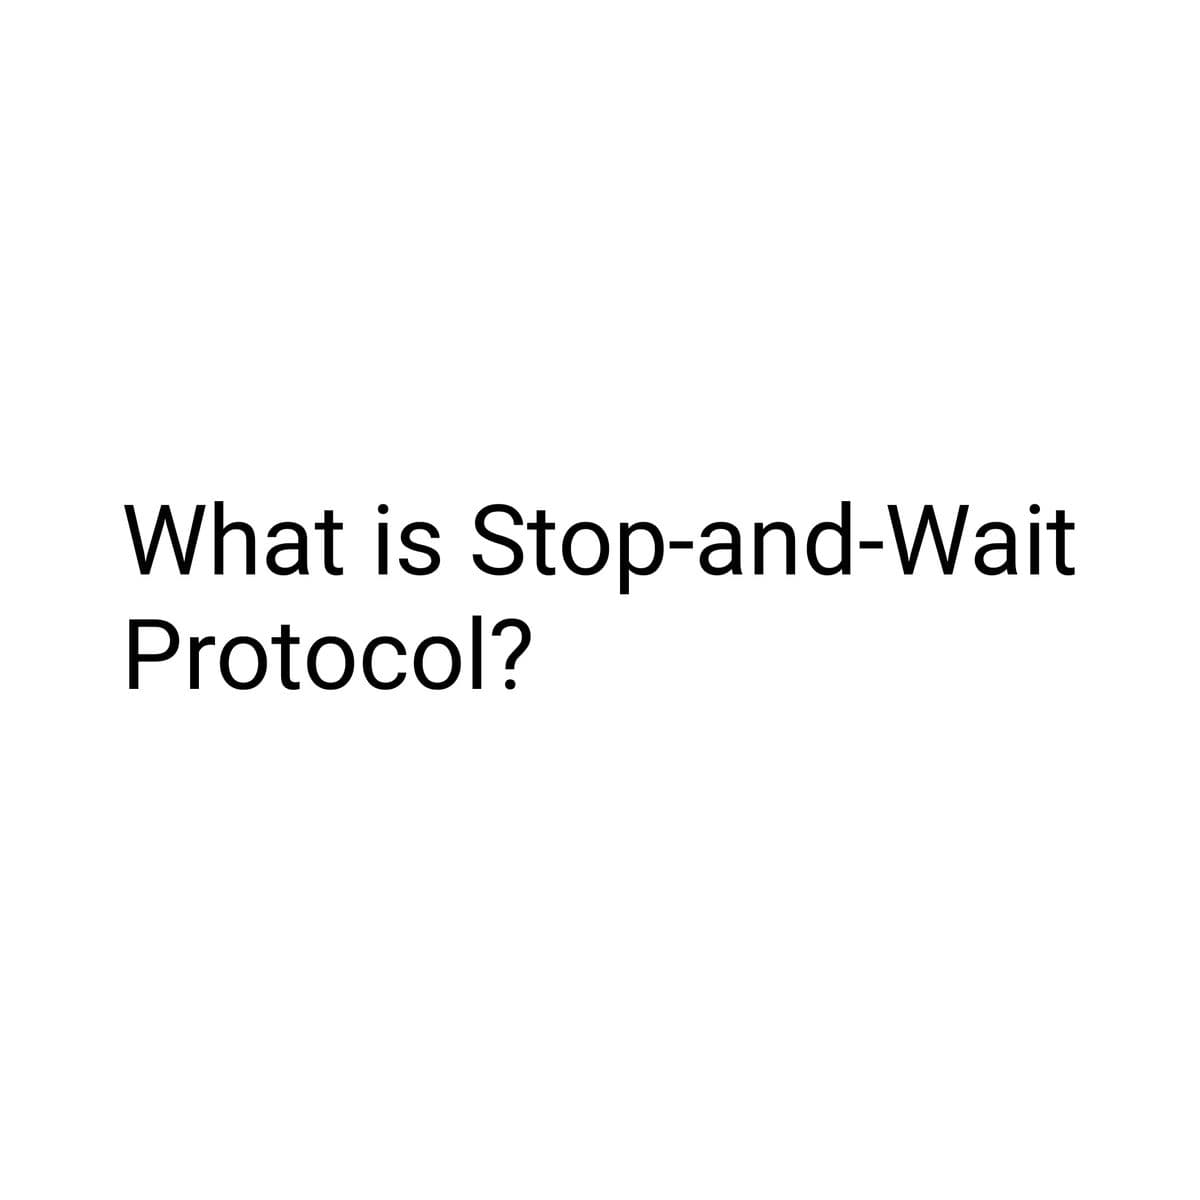 What is Stop-and-Wait
Protocol?